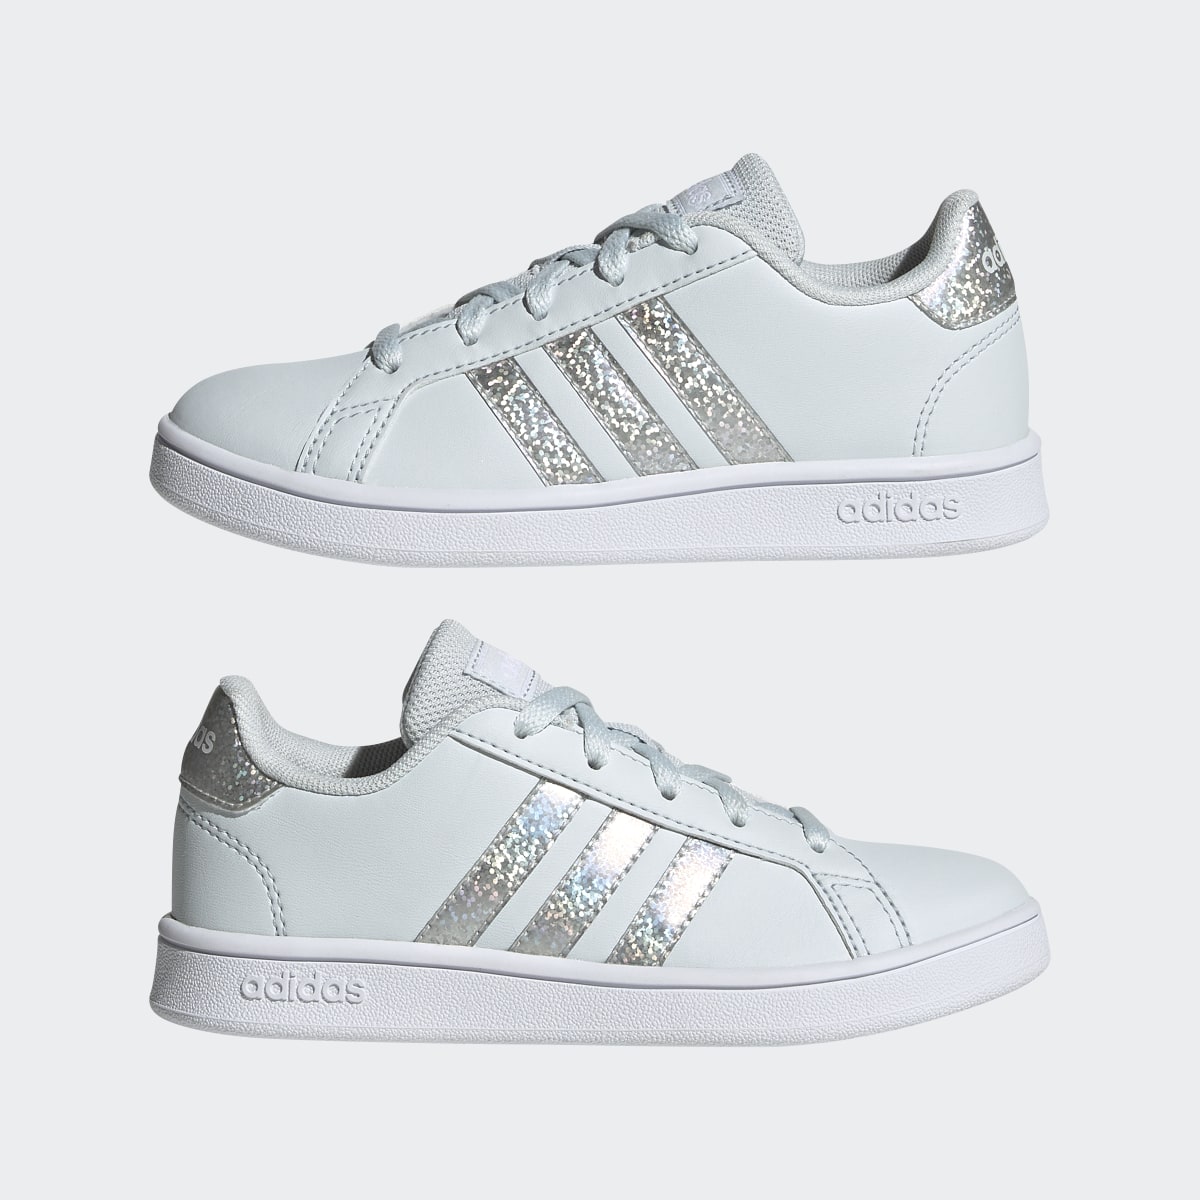 Adidas Grand Court Print Lace Shoes. 8